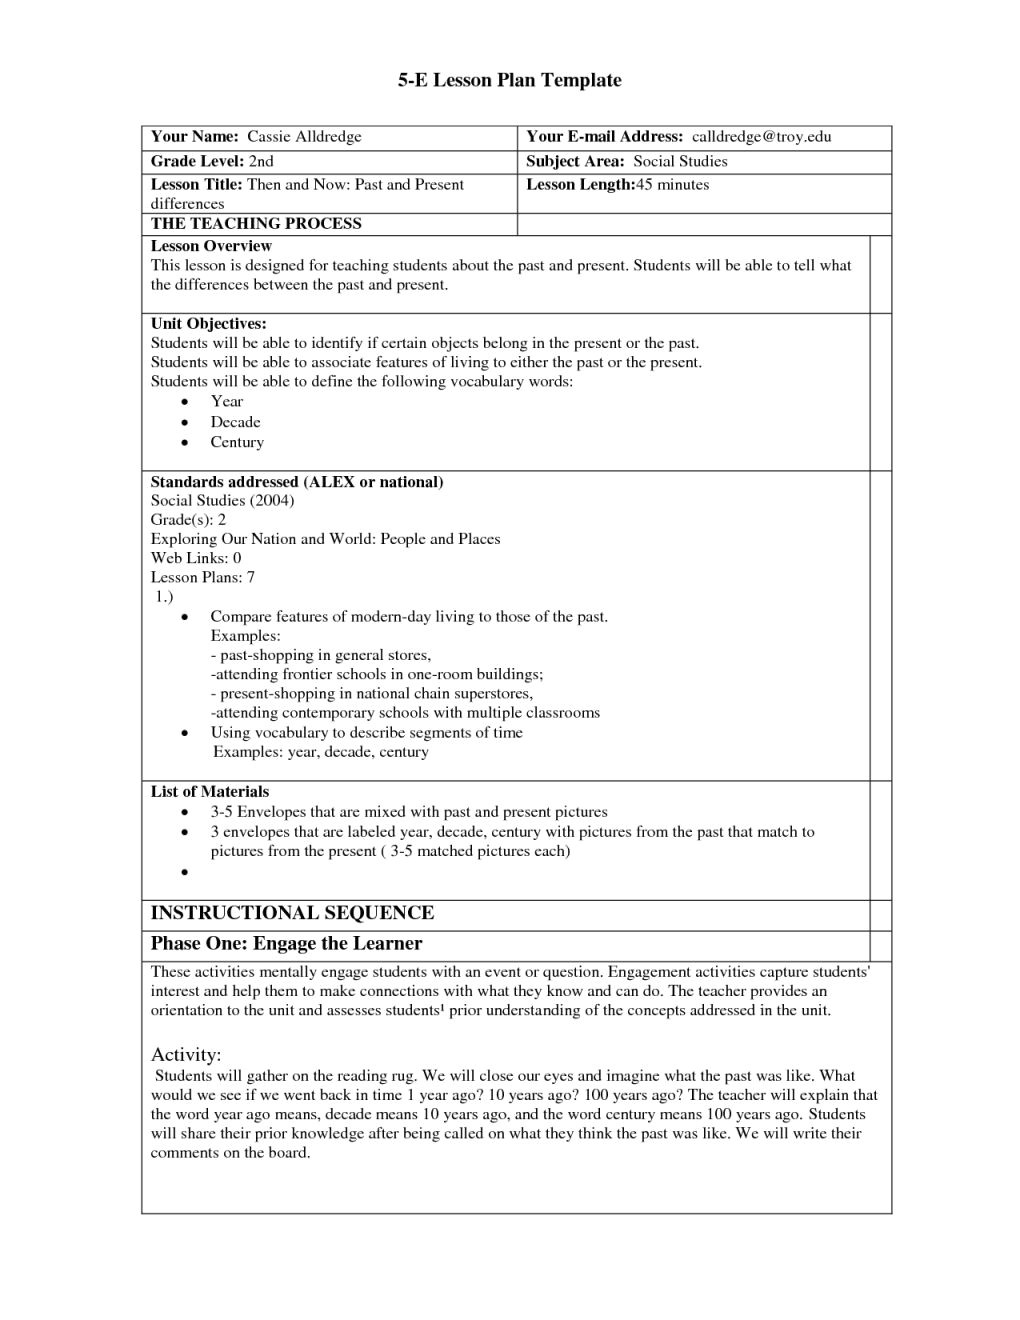 5e lesson plan template for science4